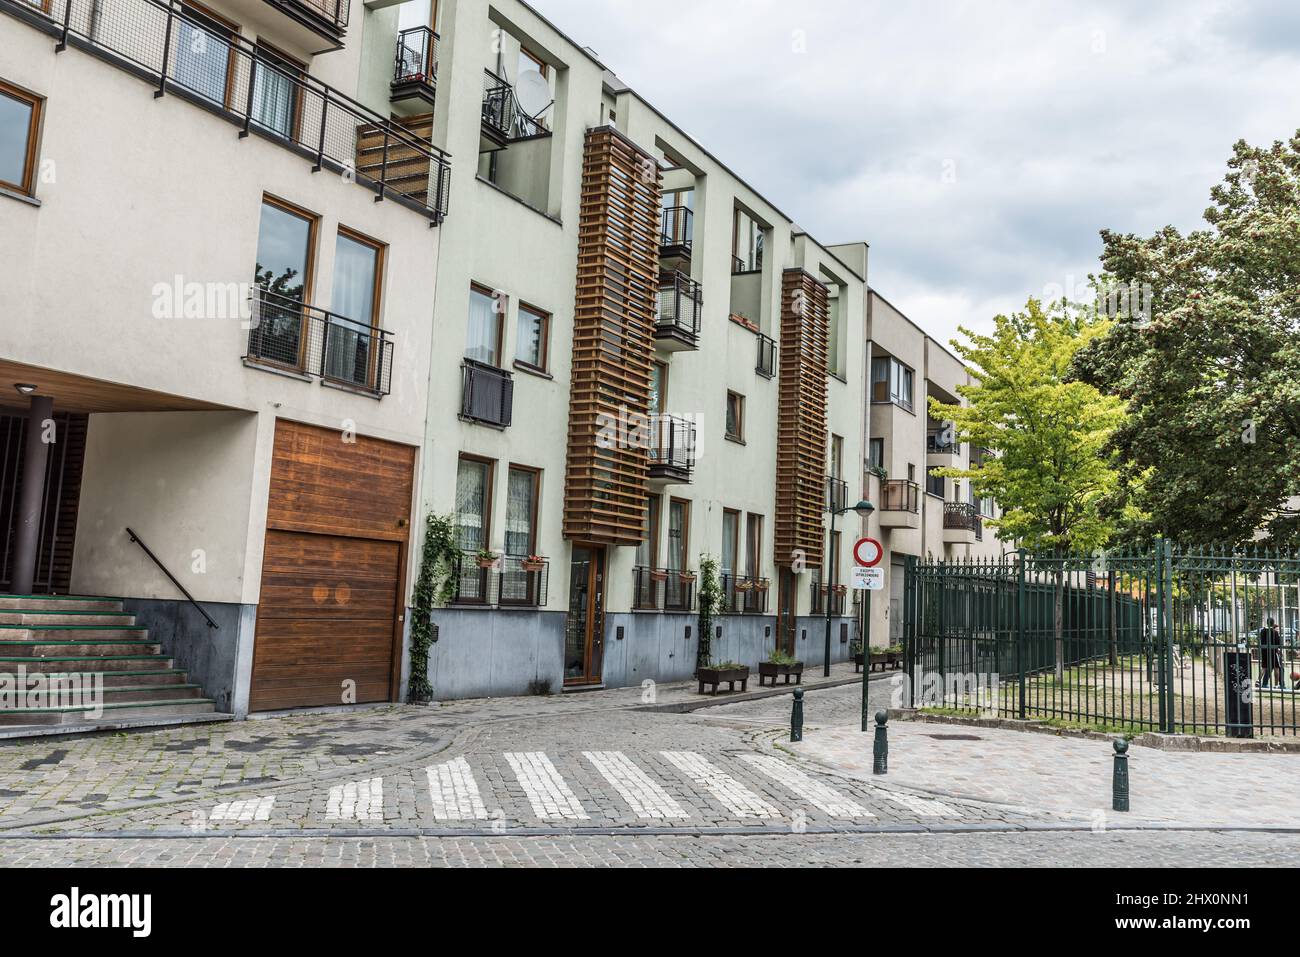 Brussels Old Town - Belgium - 06 07 2019 - Renovated apartment blocks in upperclass style at the poor borrow of the Rempart des Moins, The Monks Rampa Stock Photo